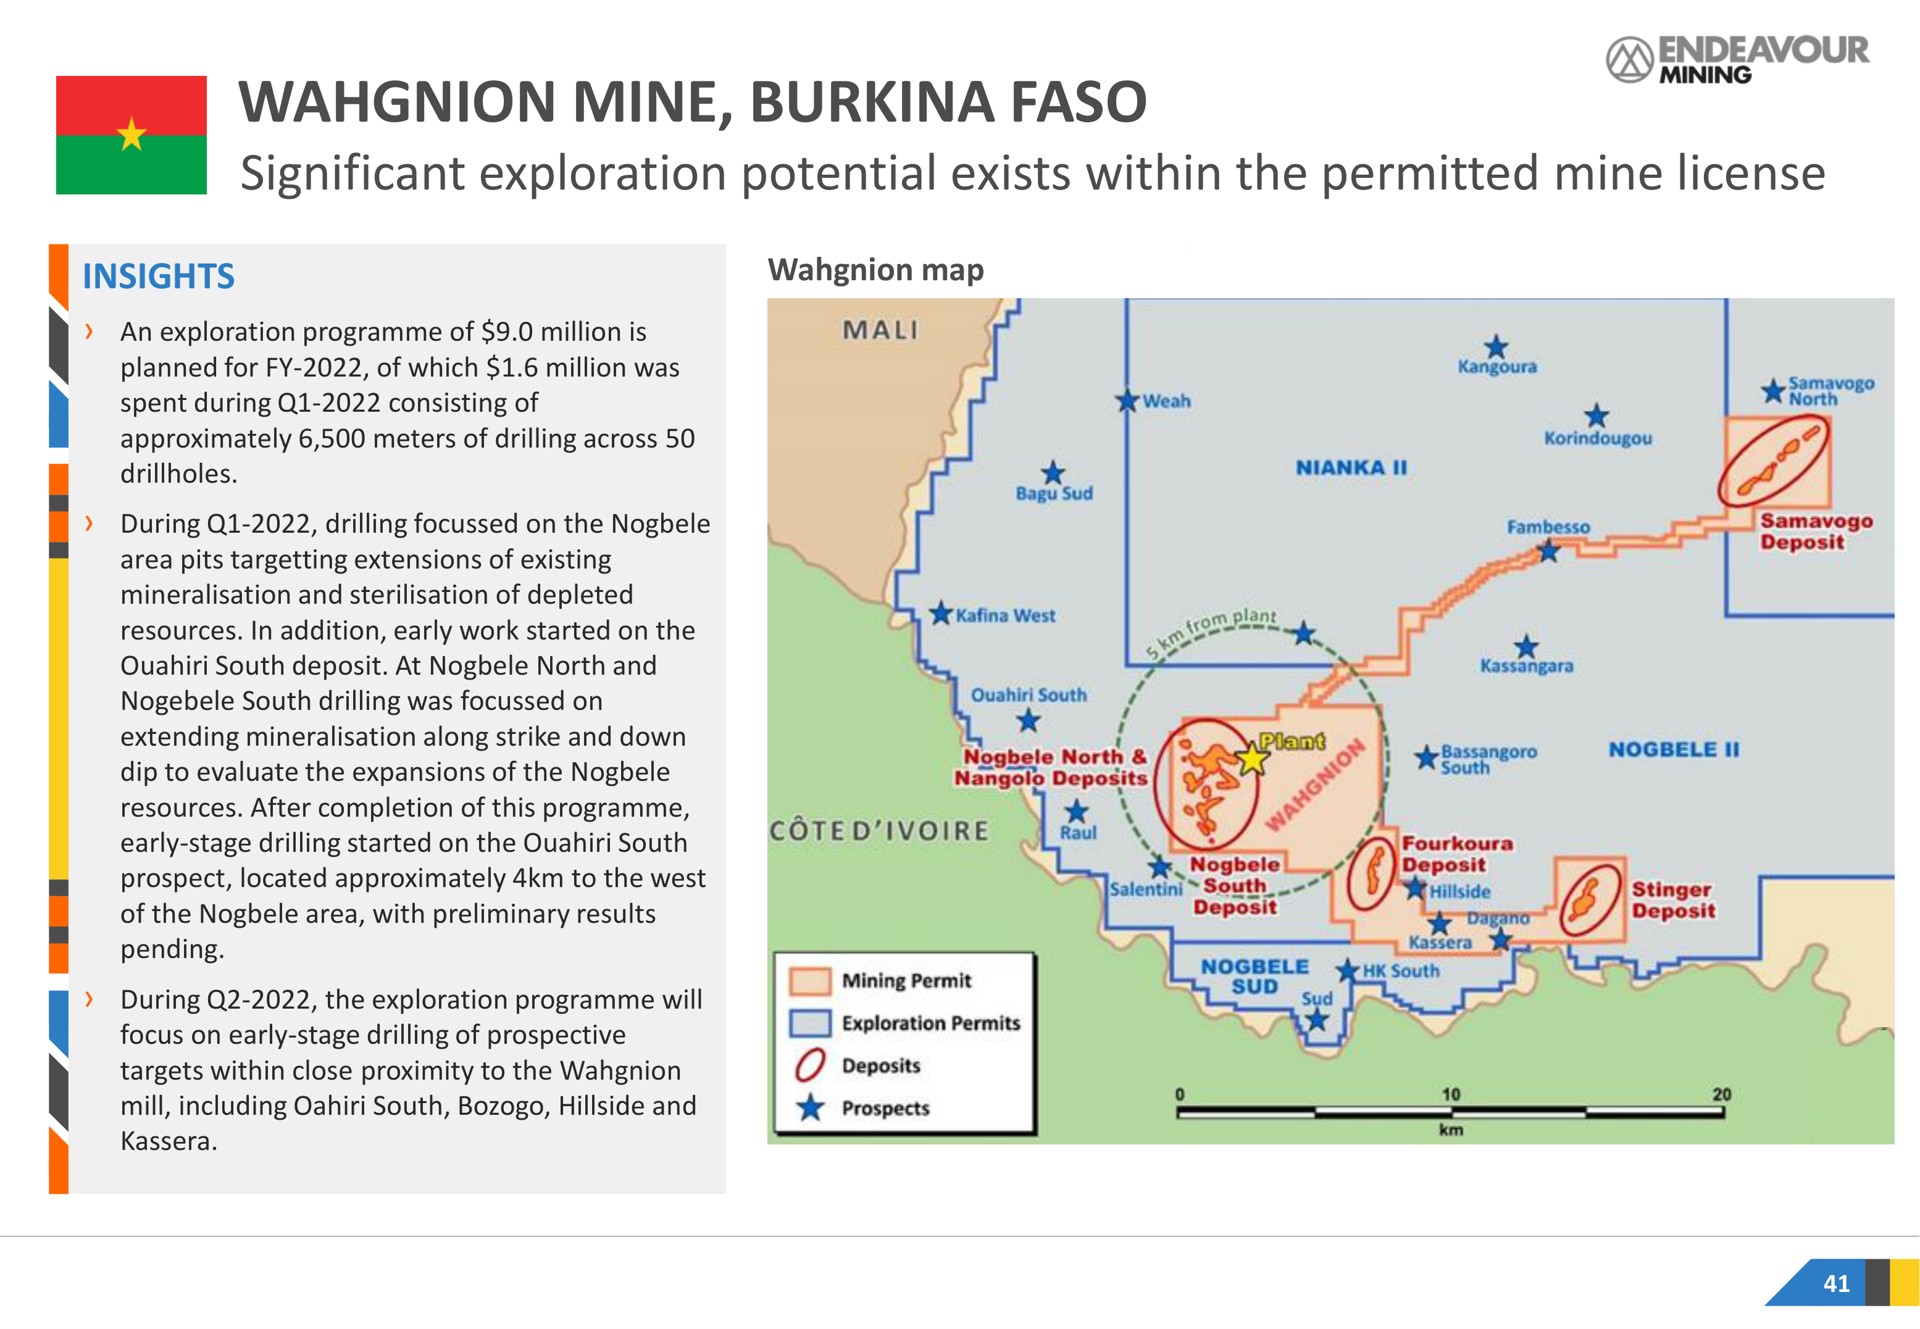 mine significant exploration potential exists within the permitted mine license insights | Endeavour Mining